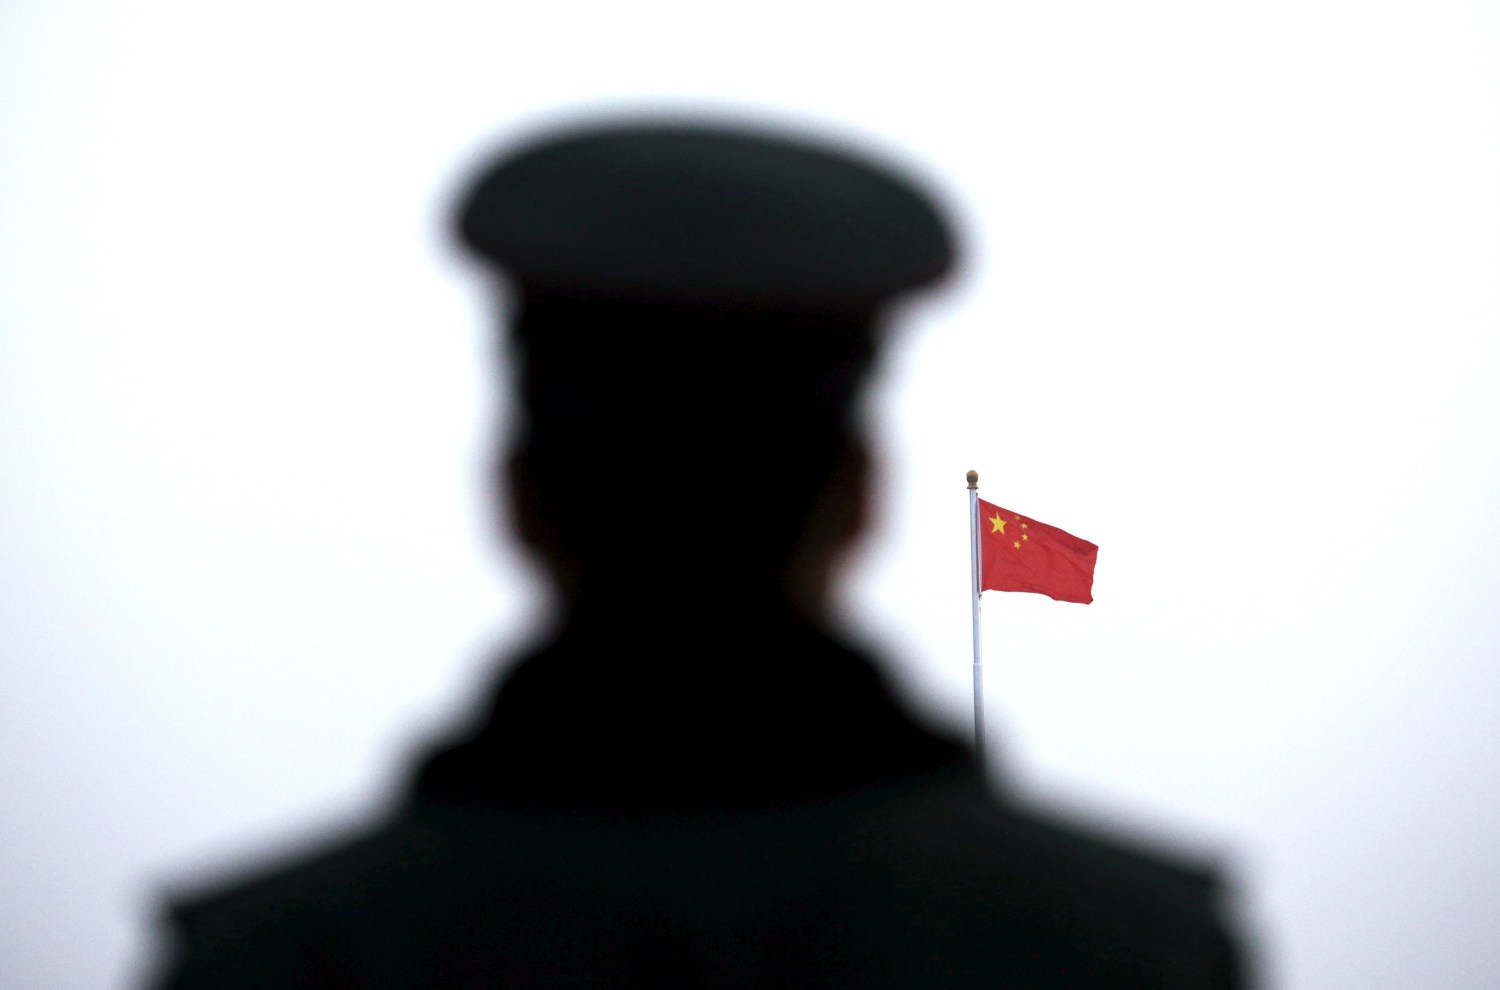 A paramilitary policeman watches a flag-raising ceremony at Tiananmen Square ahead of the opening session of the National People's Congress in Beijing, China